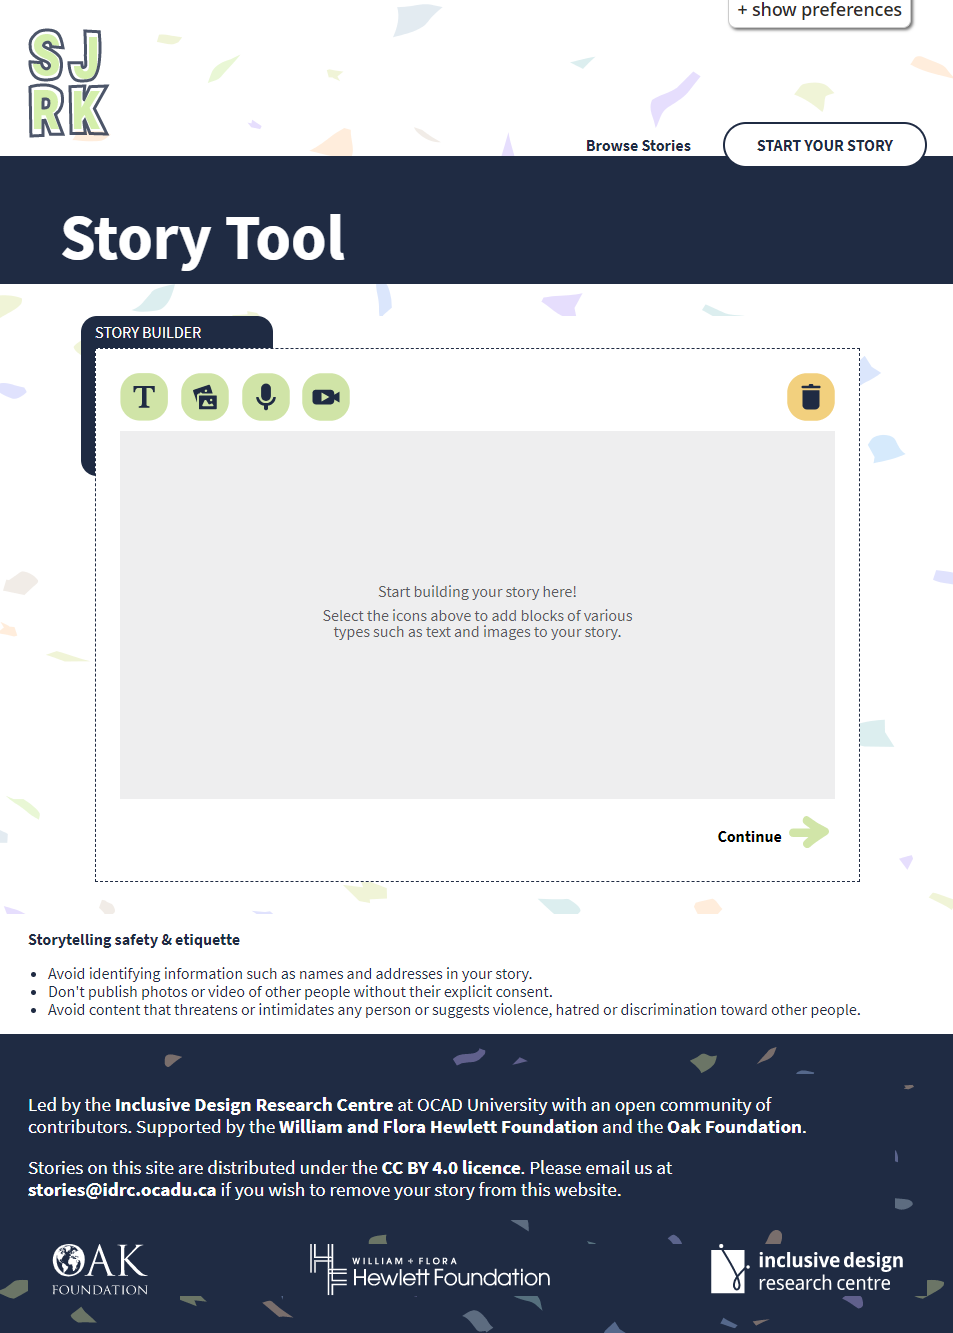 a colourful version of the Storytelling Tool with a design that mimics the SJRK website, including the SJRK logo, the same dark blue accent colour and the multicolour confetti background